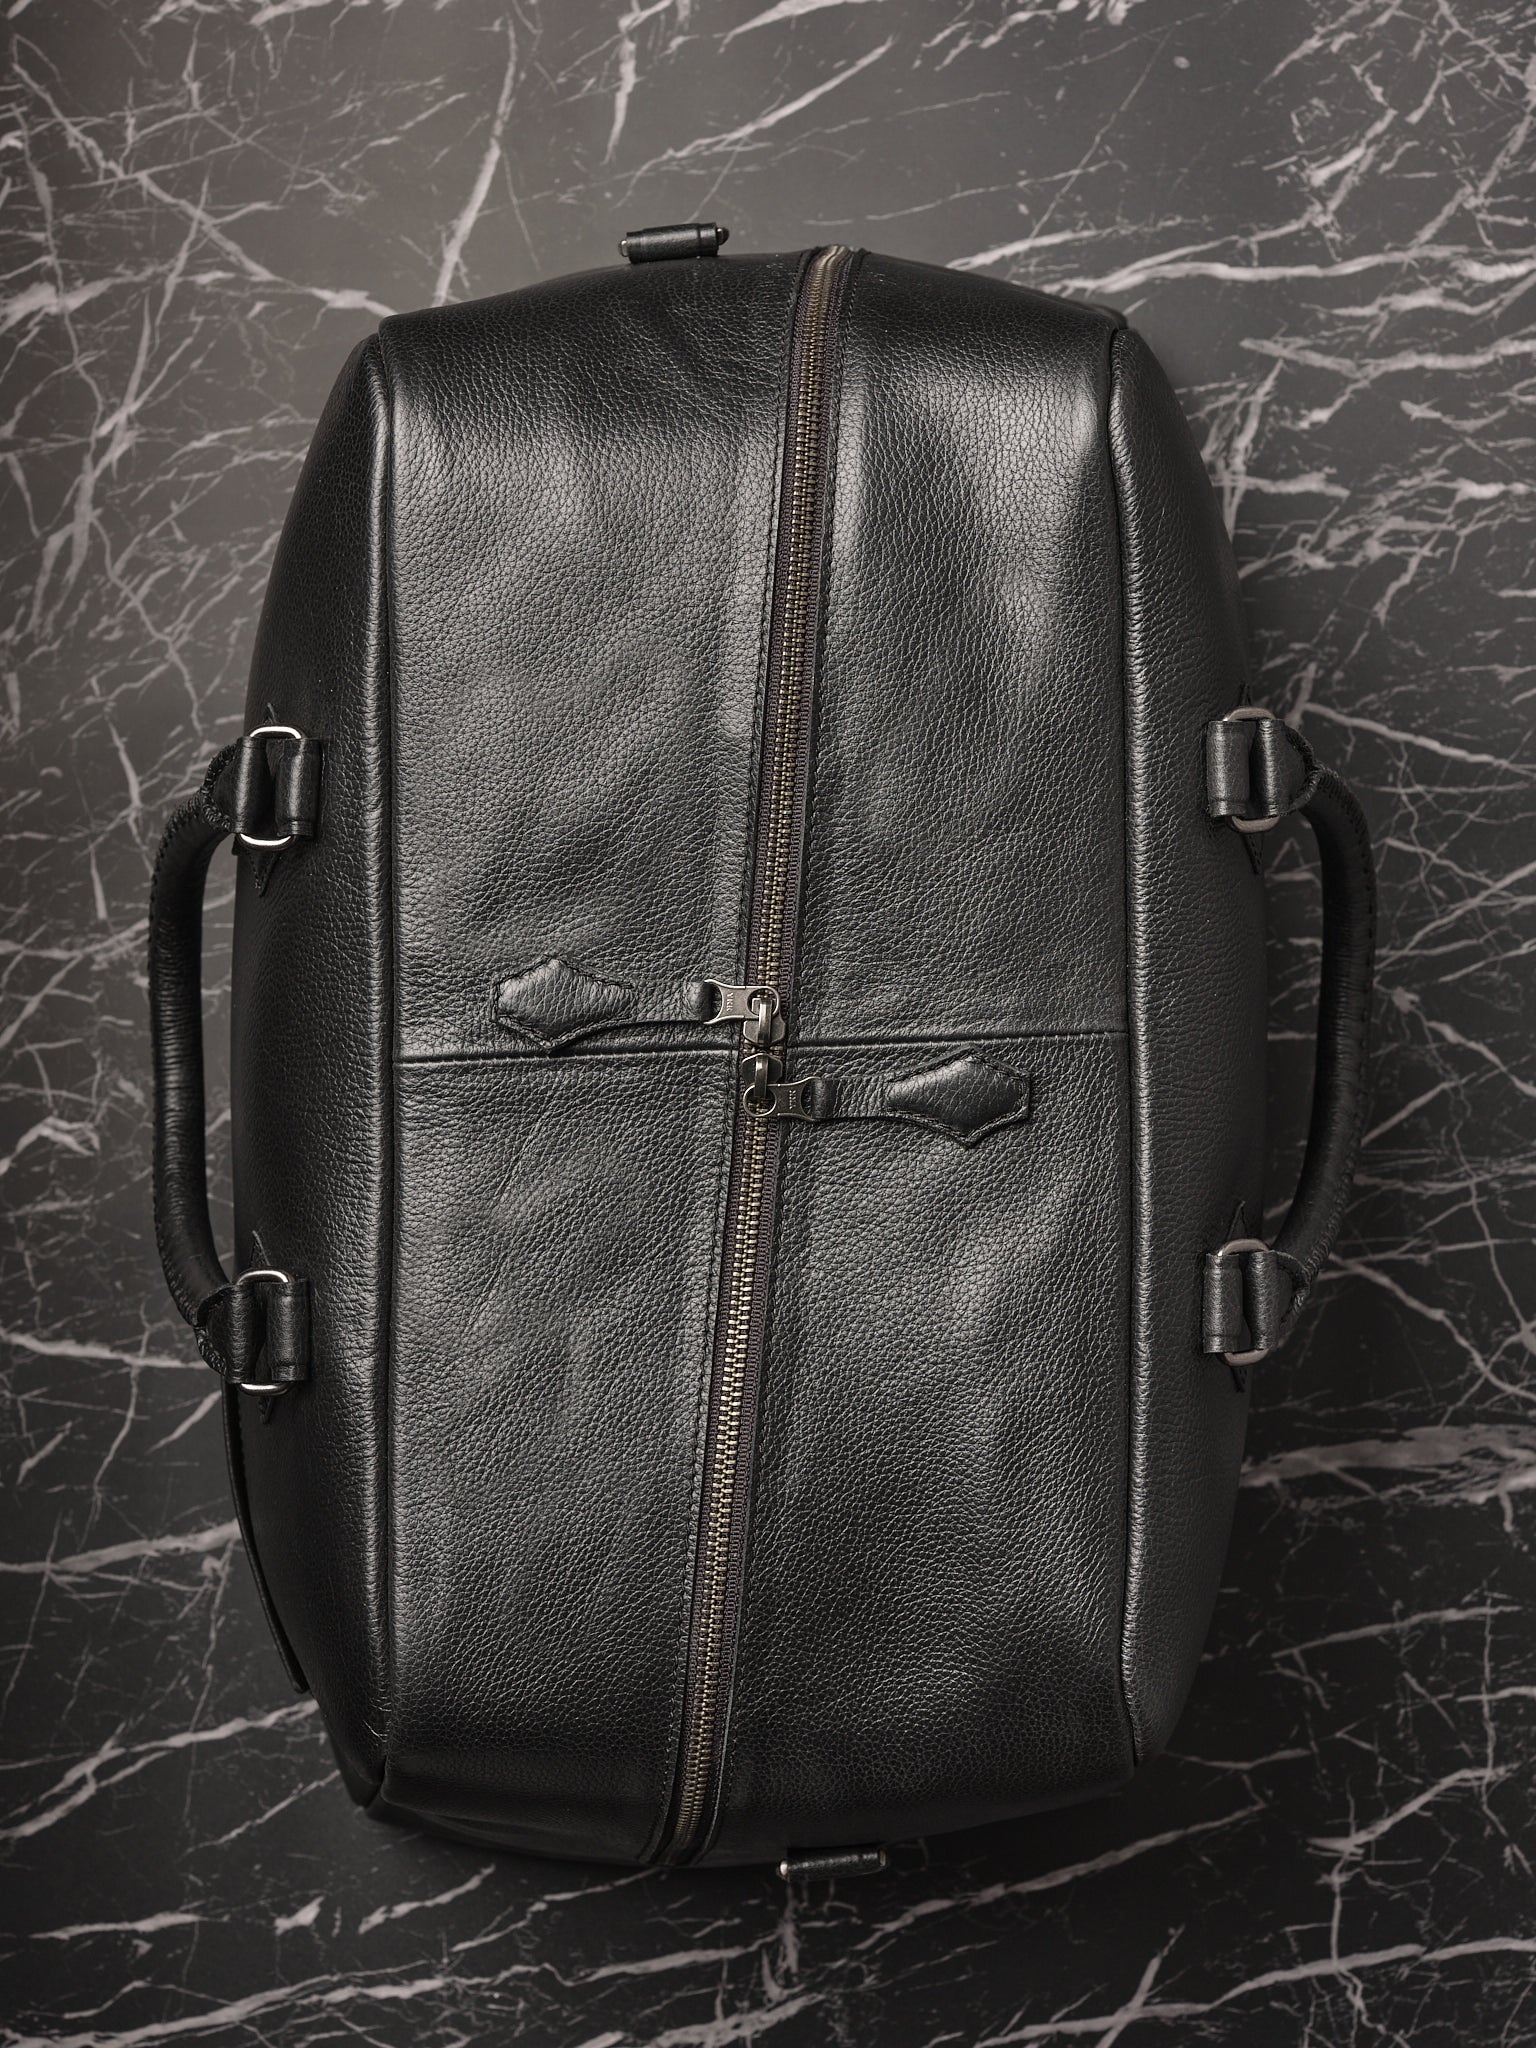 Wide Main Compartment. Weekender Bag for Men Black by Capra Leather